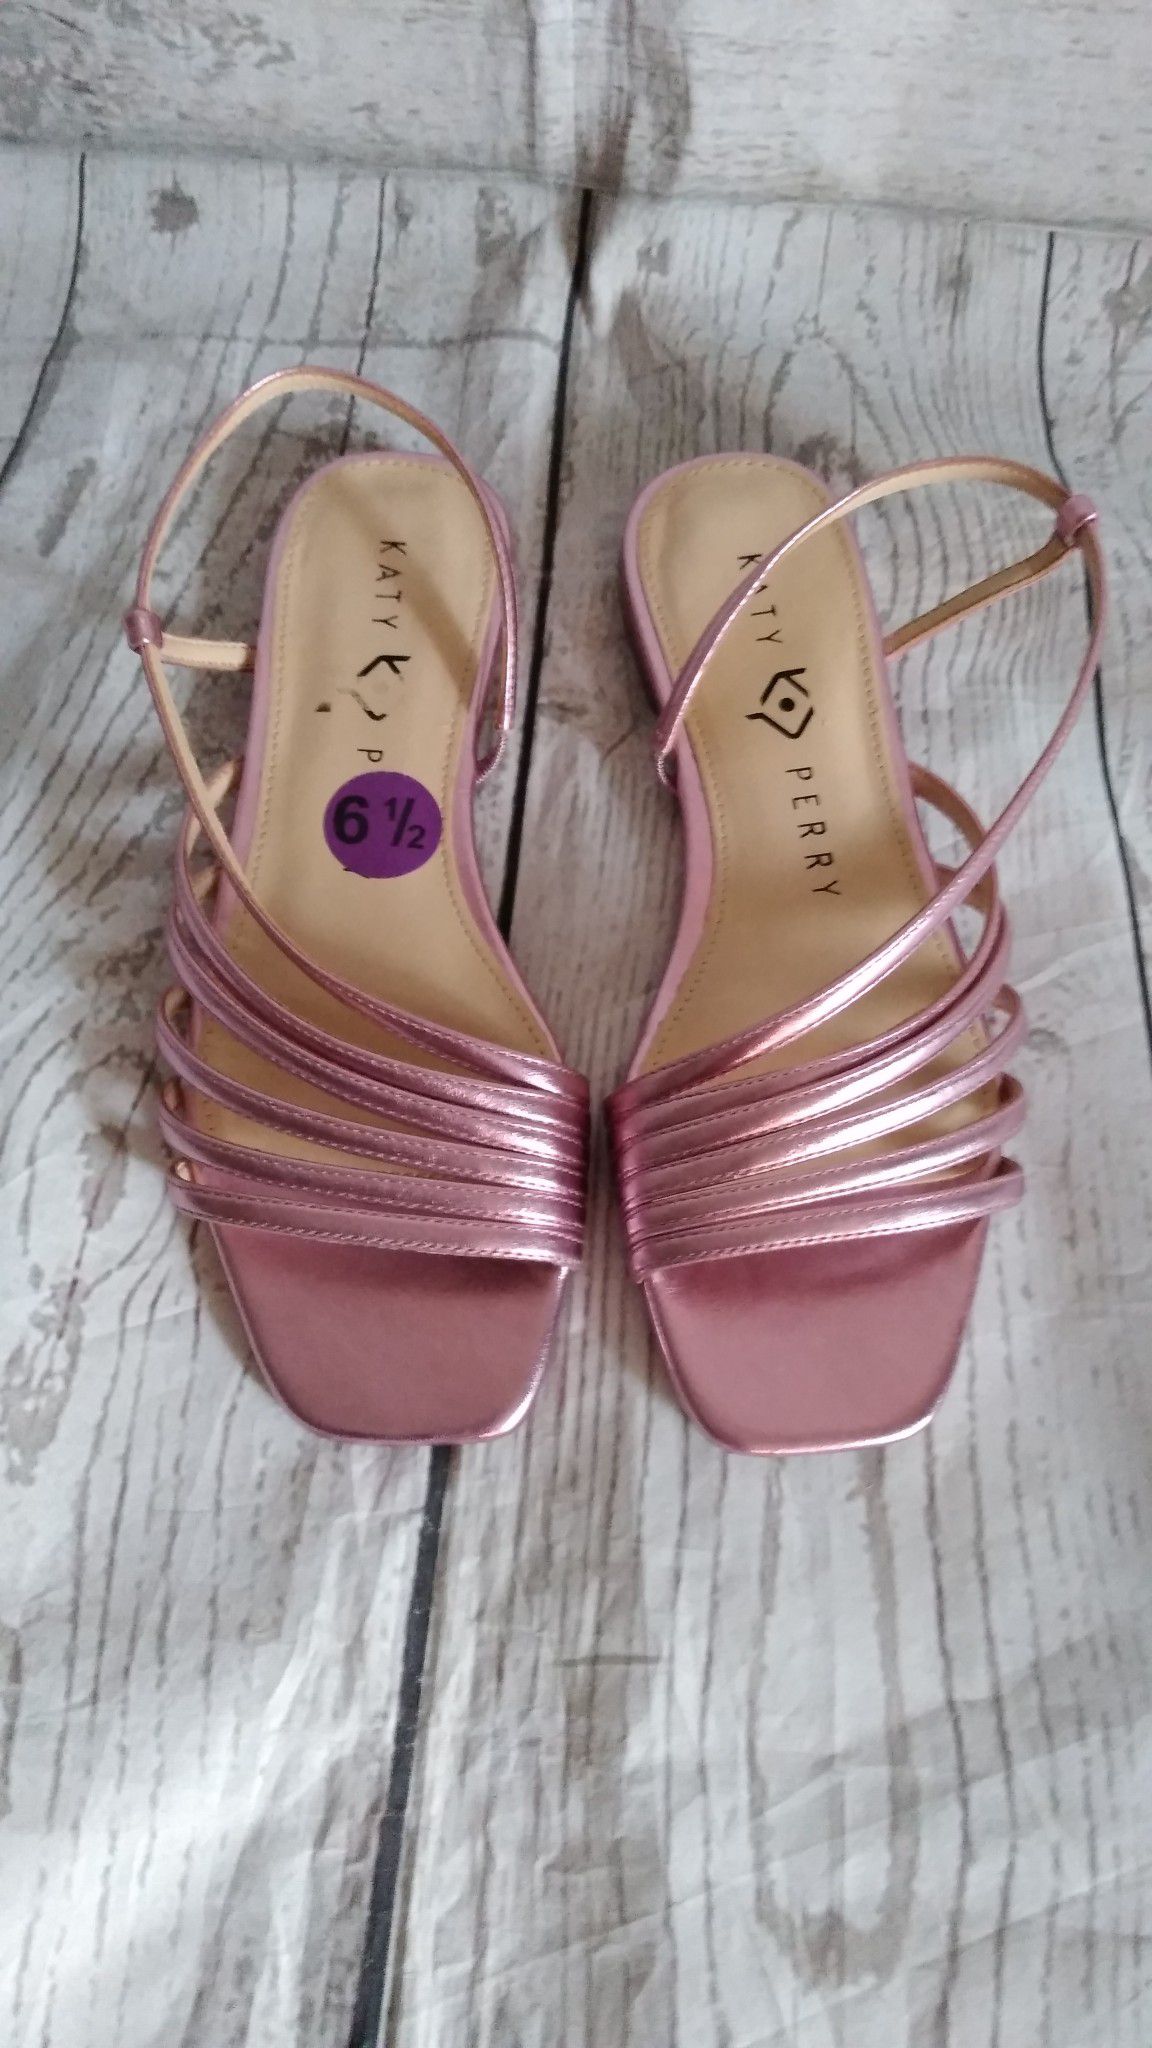 Brand New Beautiful Katy Perry Sandals , women's Size 6.5 ( never worn )